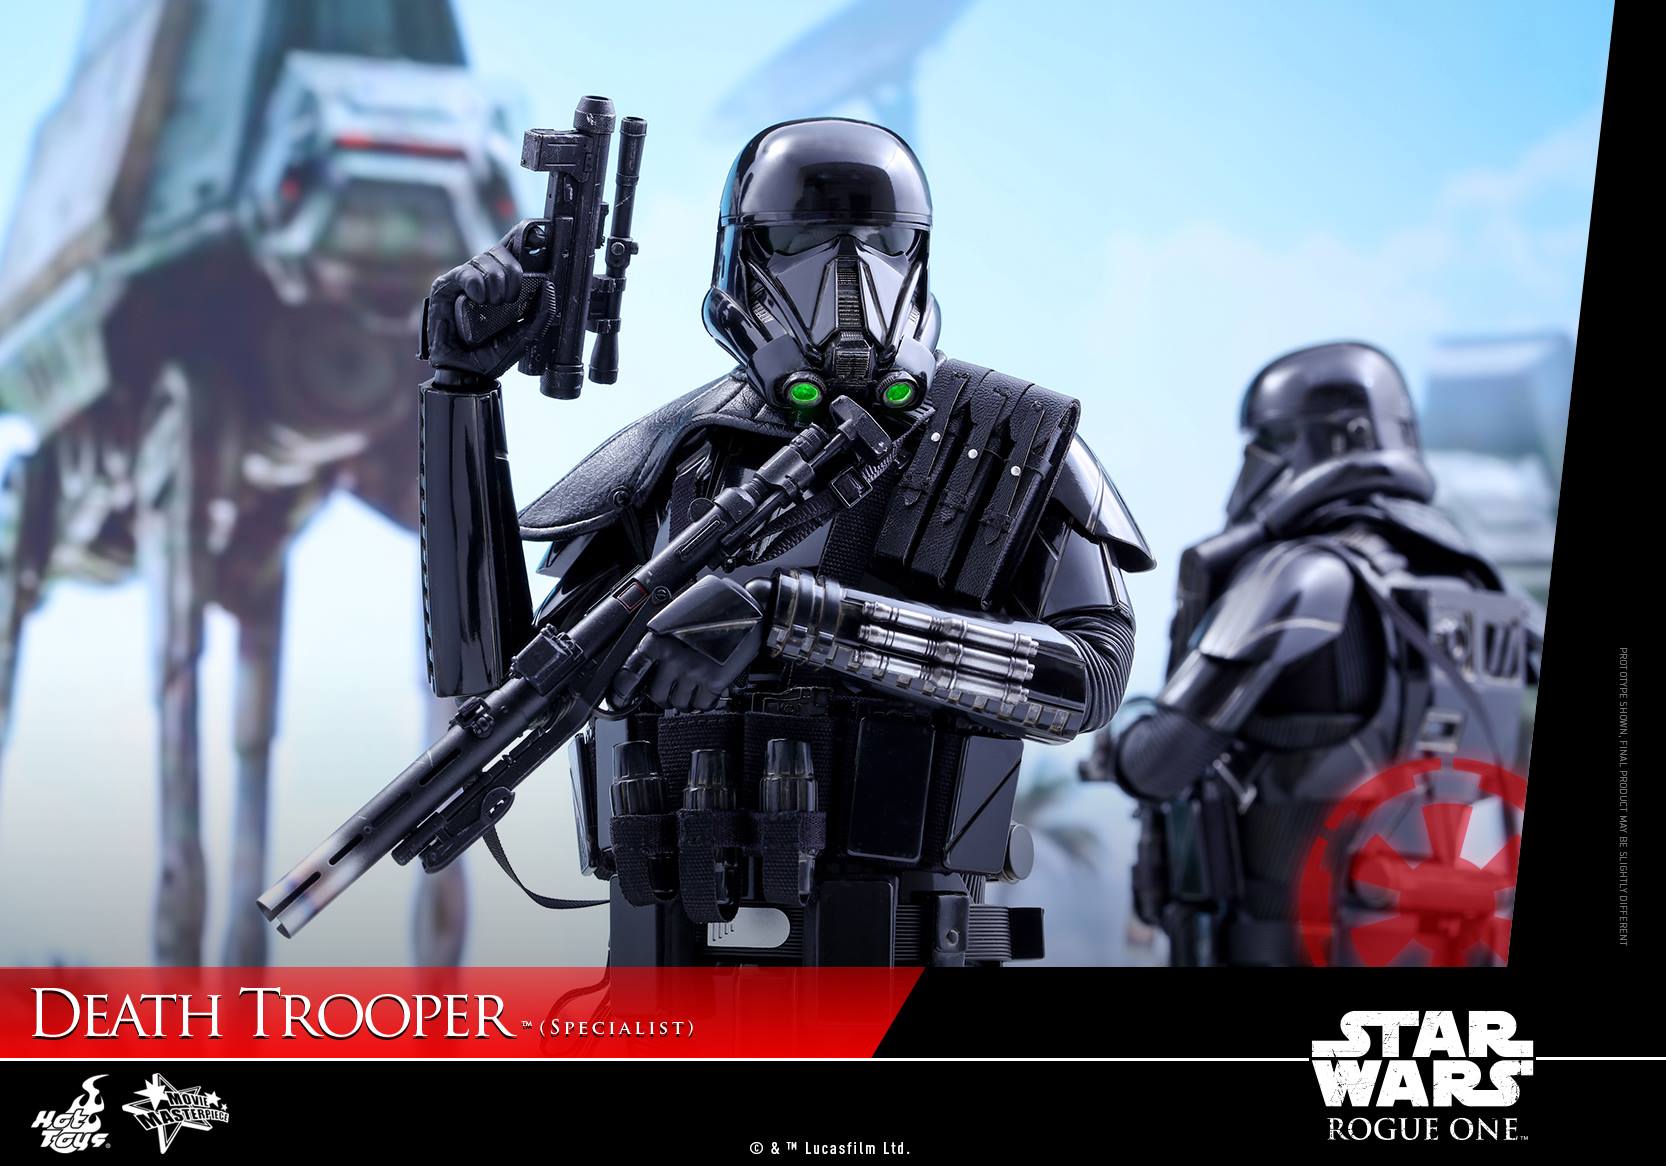 Deathtrooper Star Wars: Rogue One Hot Toys Figure Revealed | Cosmic Book News